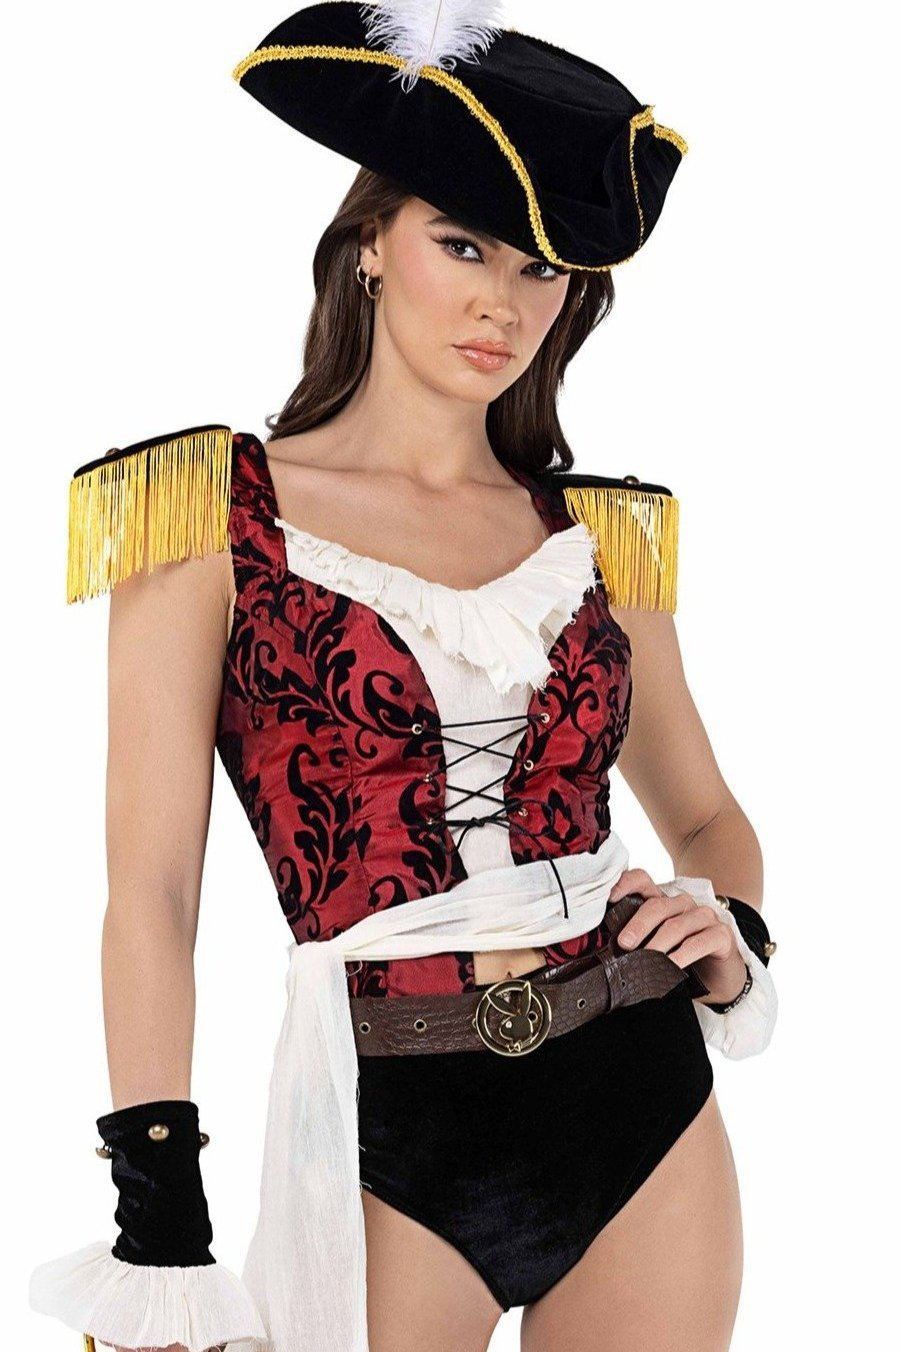 Playboy High Sea Pirate Costume-Pirate Costumes-Roma Costumes-SEXYSHOES.COM